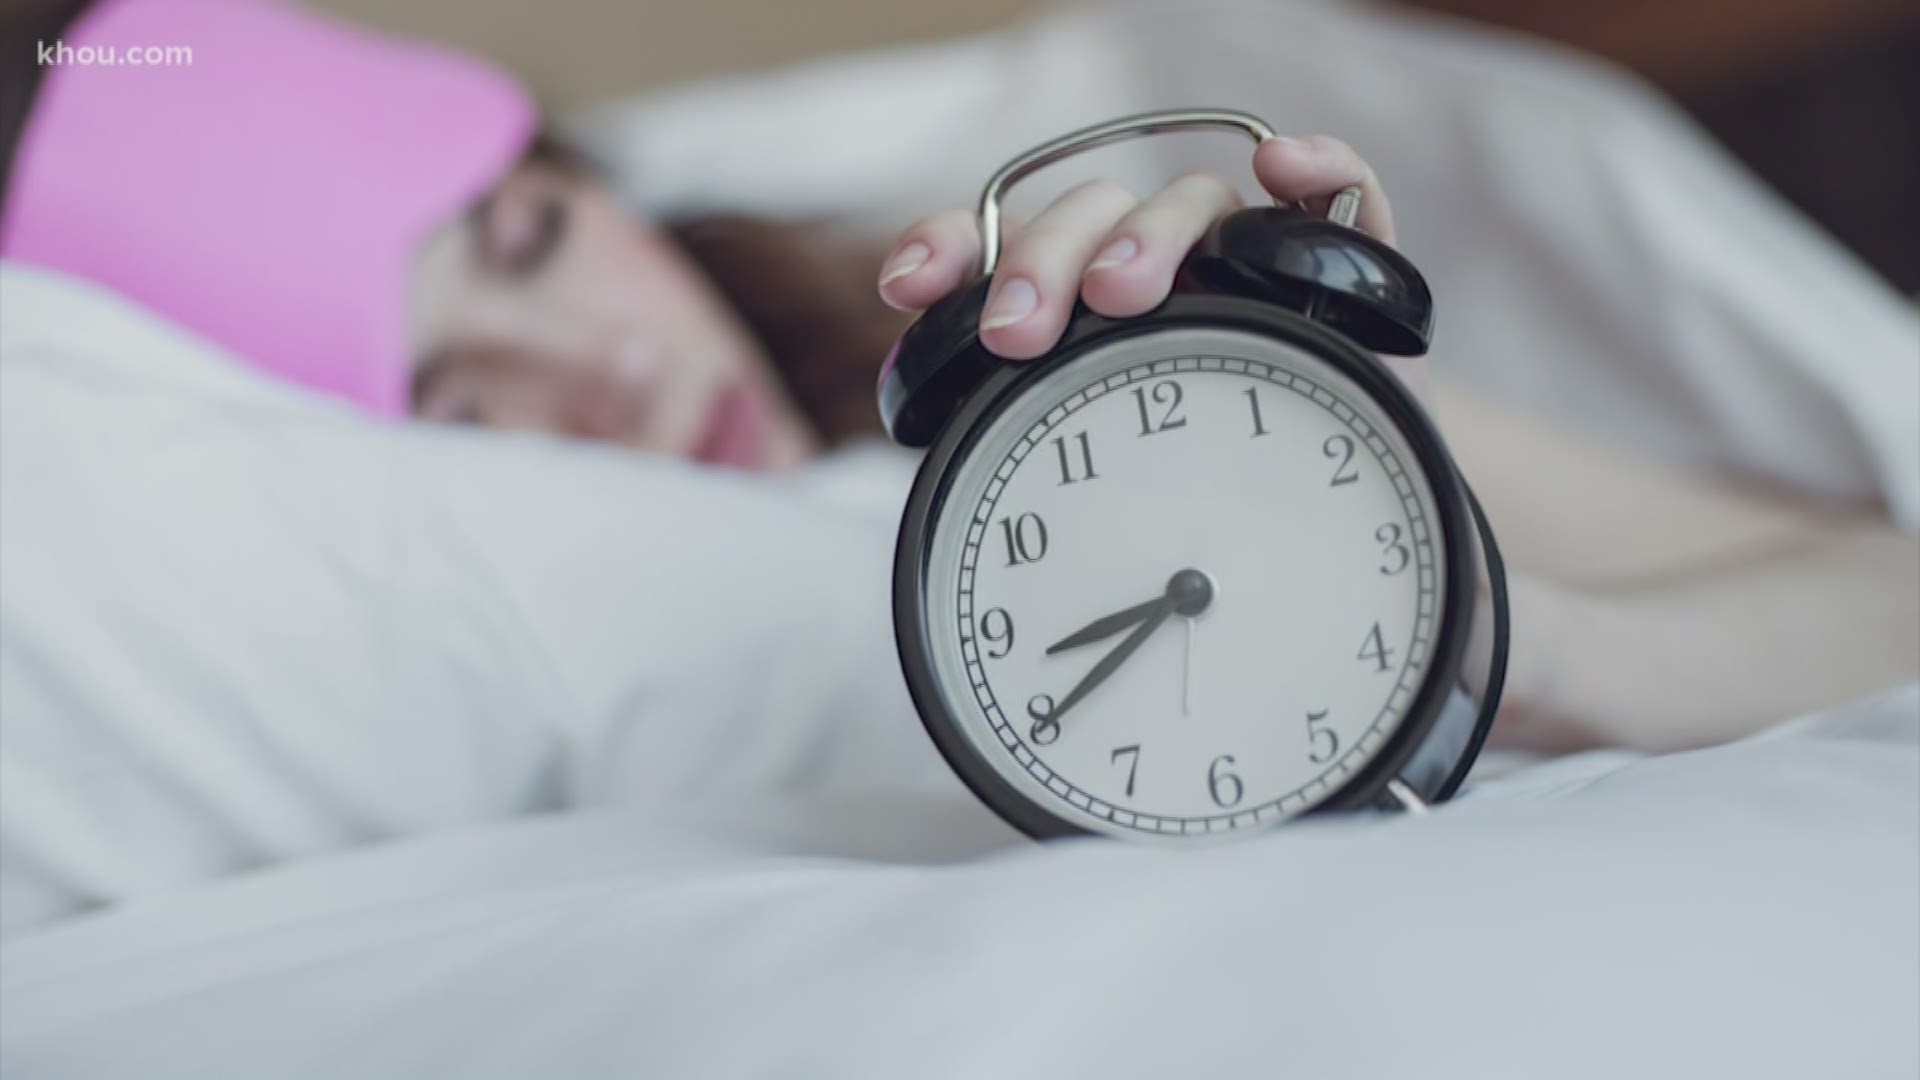 March 11 is National Nap Day. After the spring forward for Daylight Saving, you might really need one. But are naps even a good idea? Find out what the Mayo Clinic has to say about it.